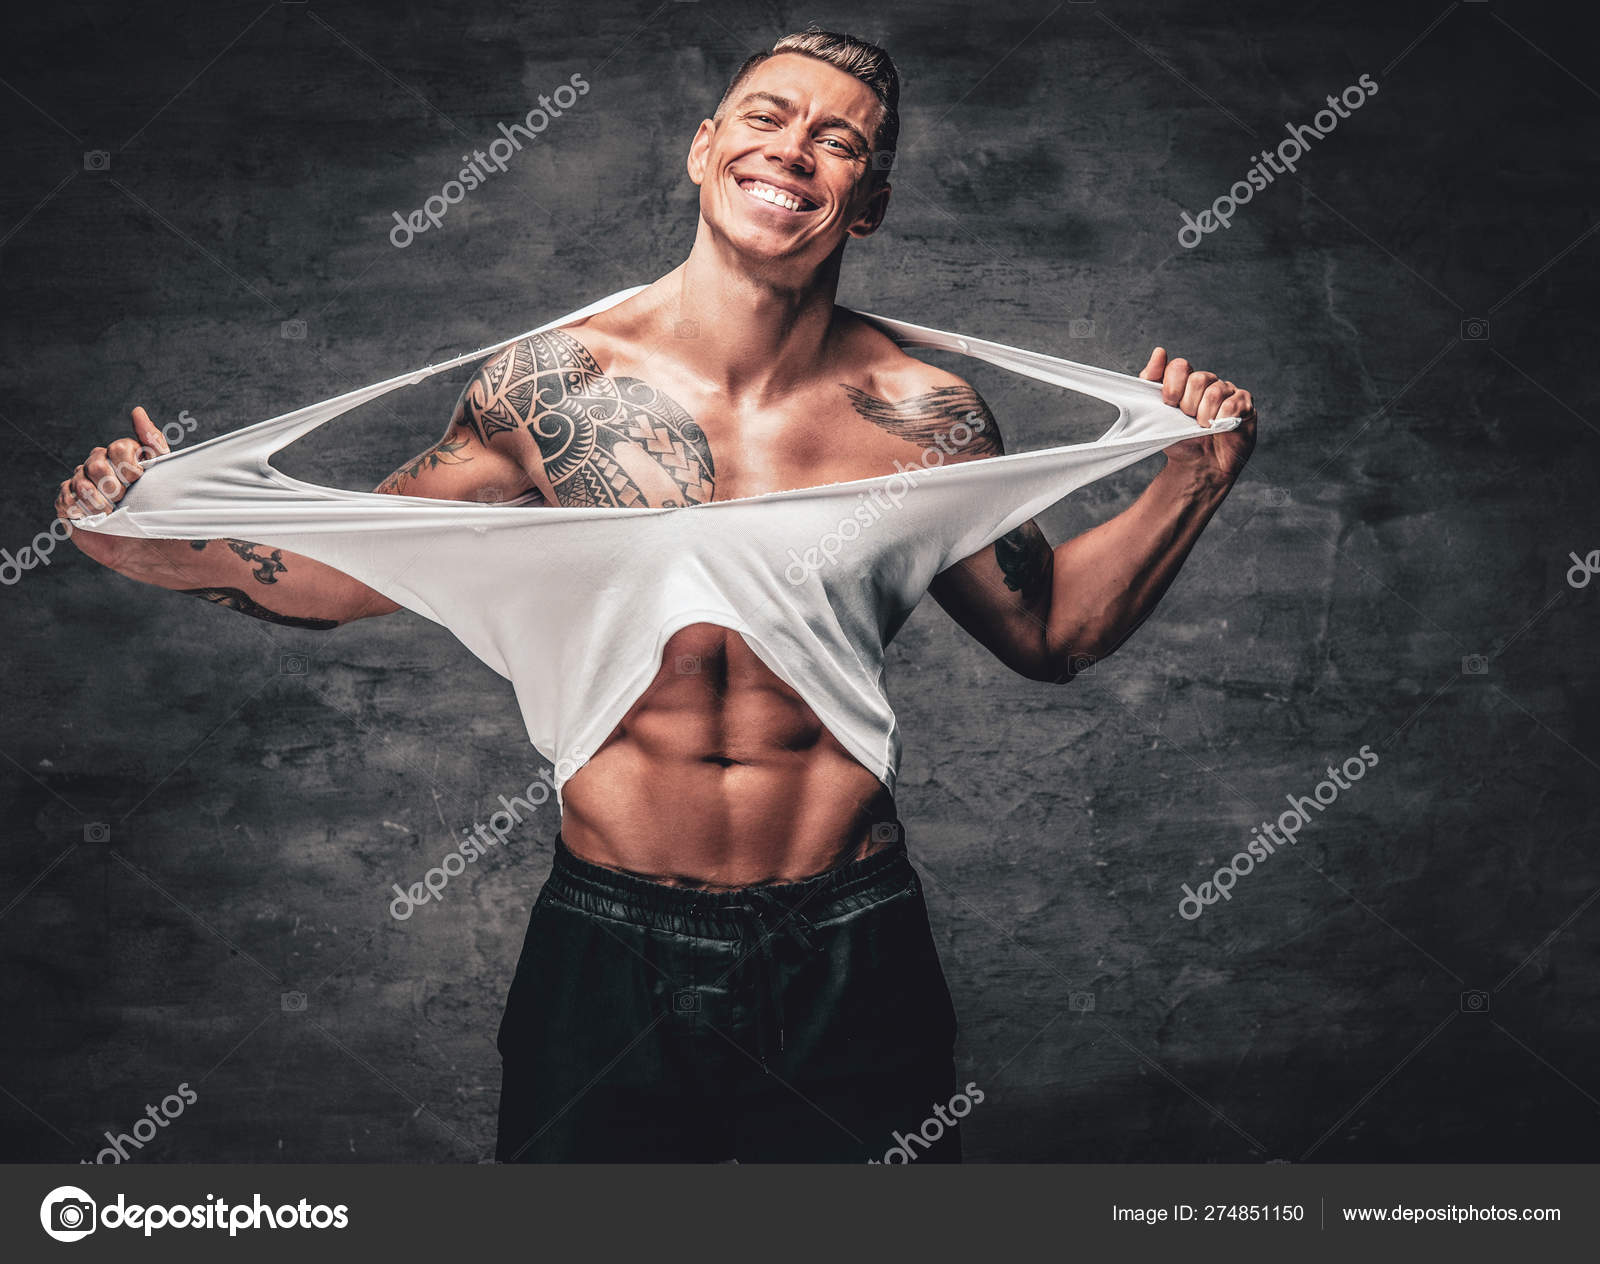 10845 Ripped Guys Images, Stock Photos & Vectors